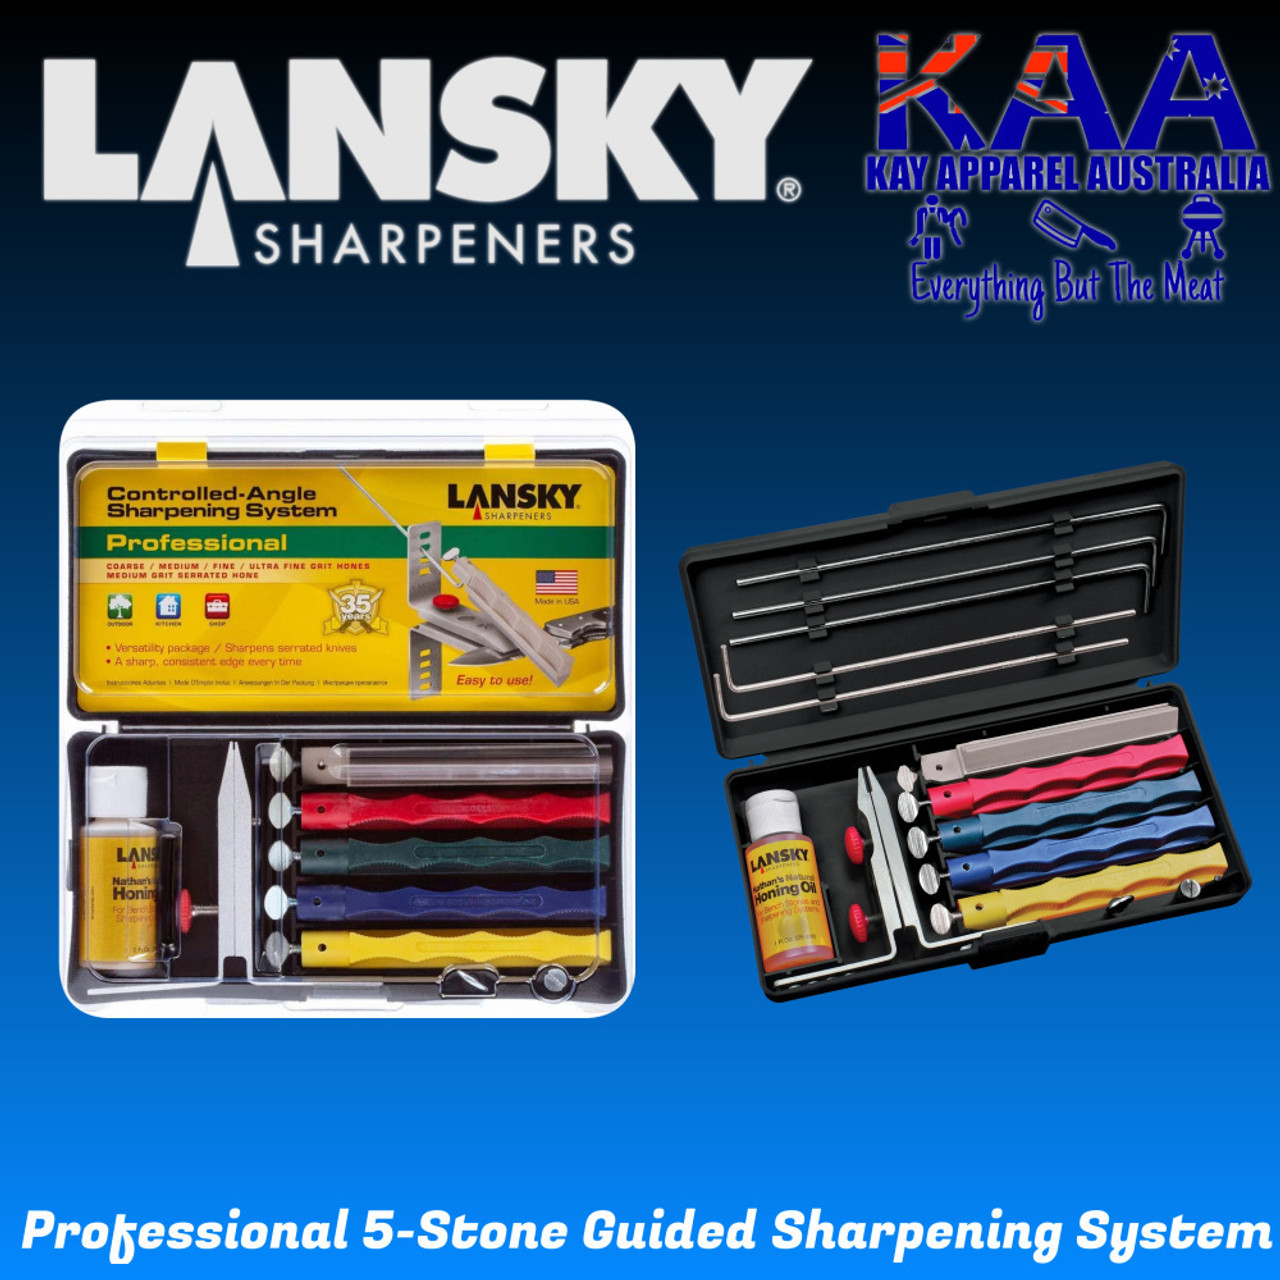 https://cdn11.bigcommerce.com/s-uyjg7n24jh/images/stencil/1280x1280/products/4267/10120/Lansky_LKCPR_Professional_5-Stone_Guided_Sharpening_System__16436.1701899478.jpg?c=2